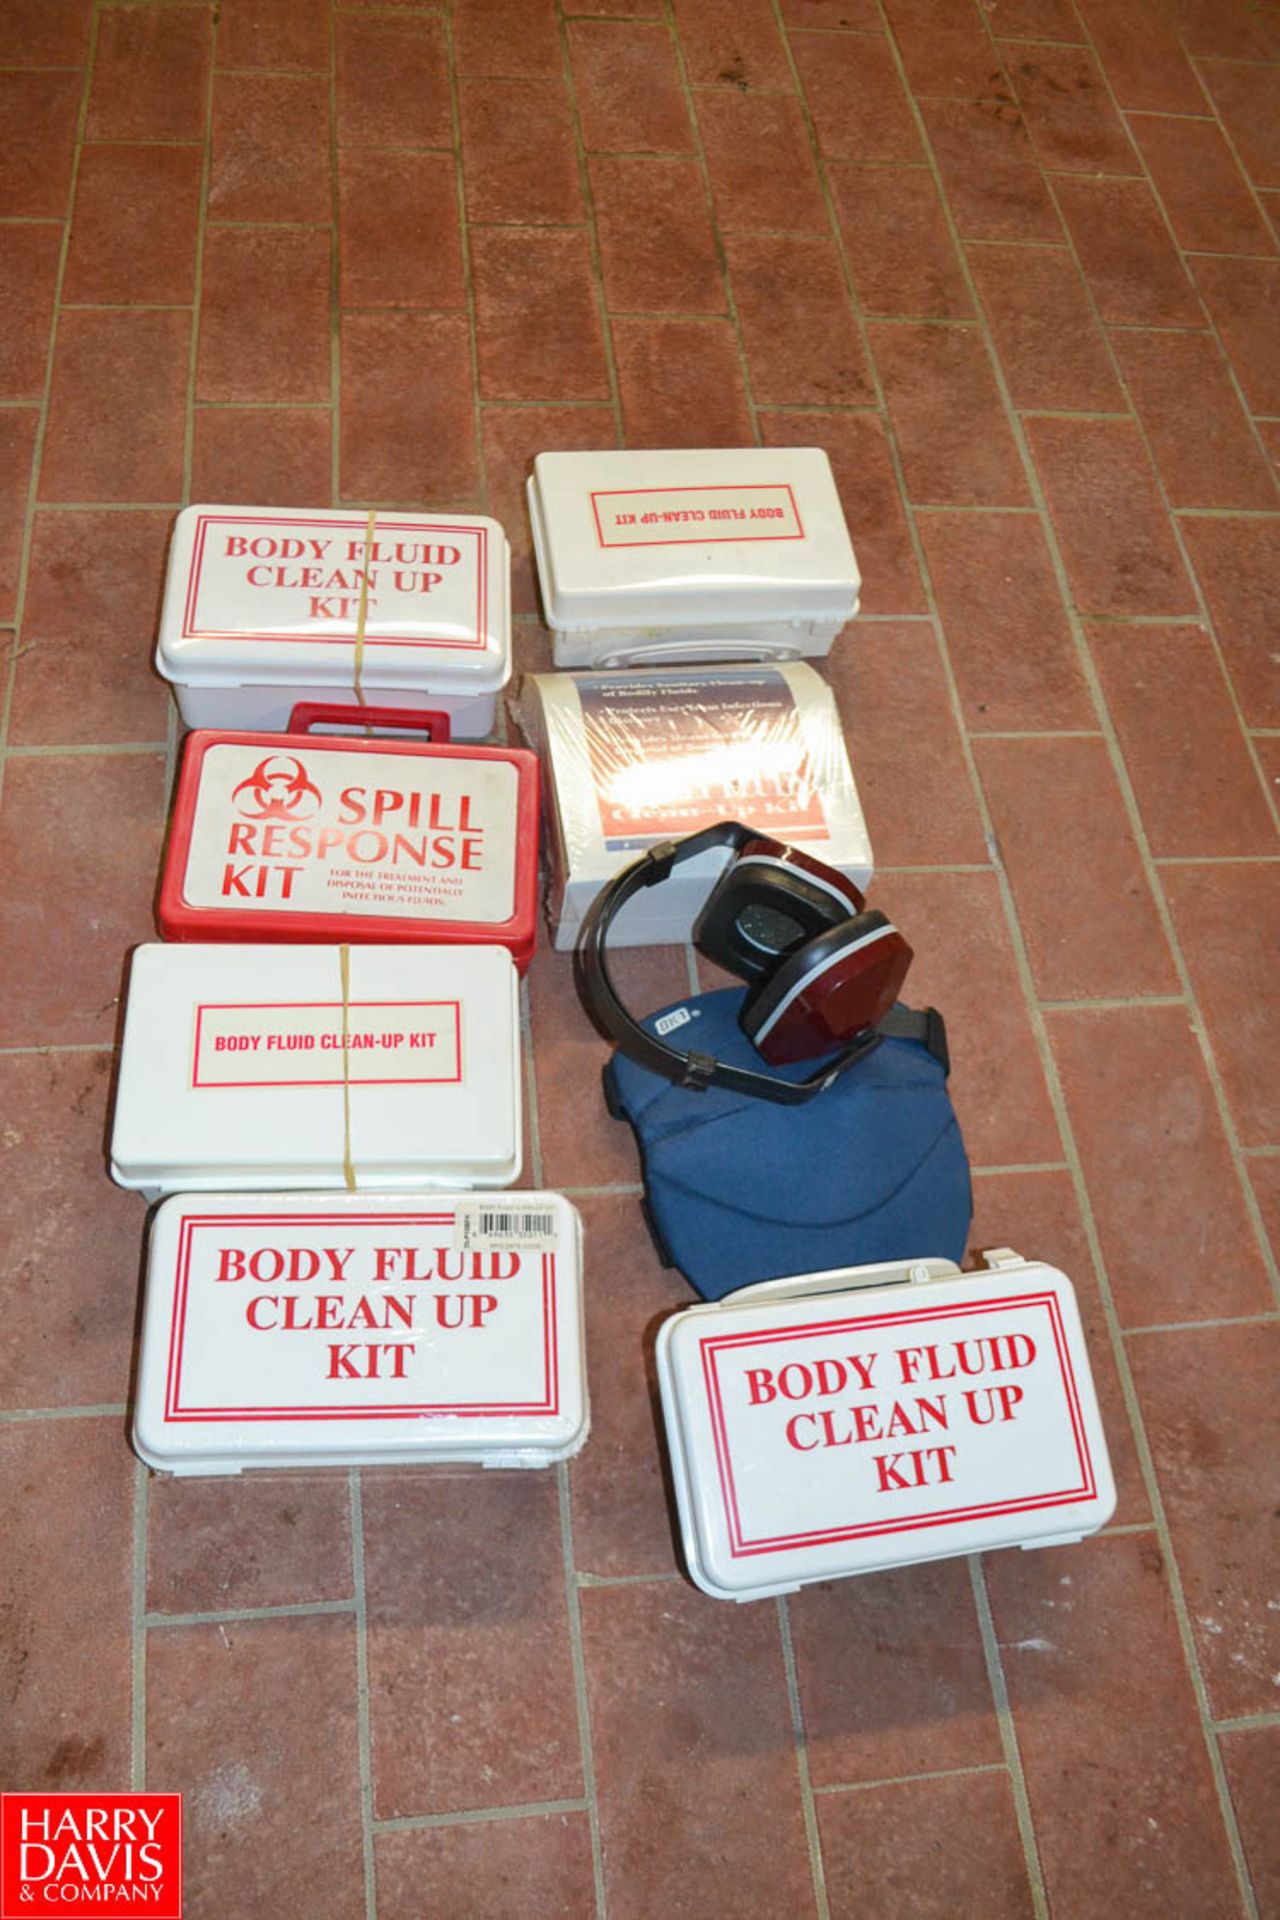 Assorted Safety Items; Spill Response and Bodily Fluids Clean Up Kits